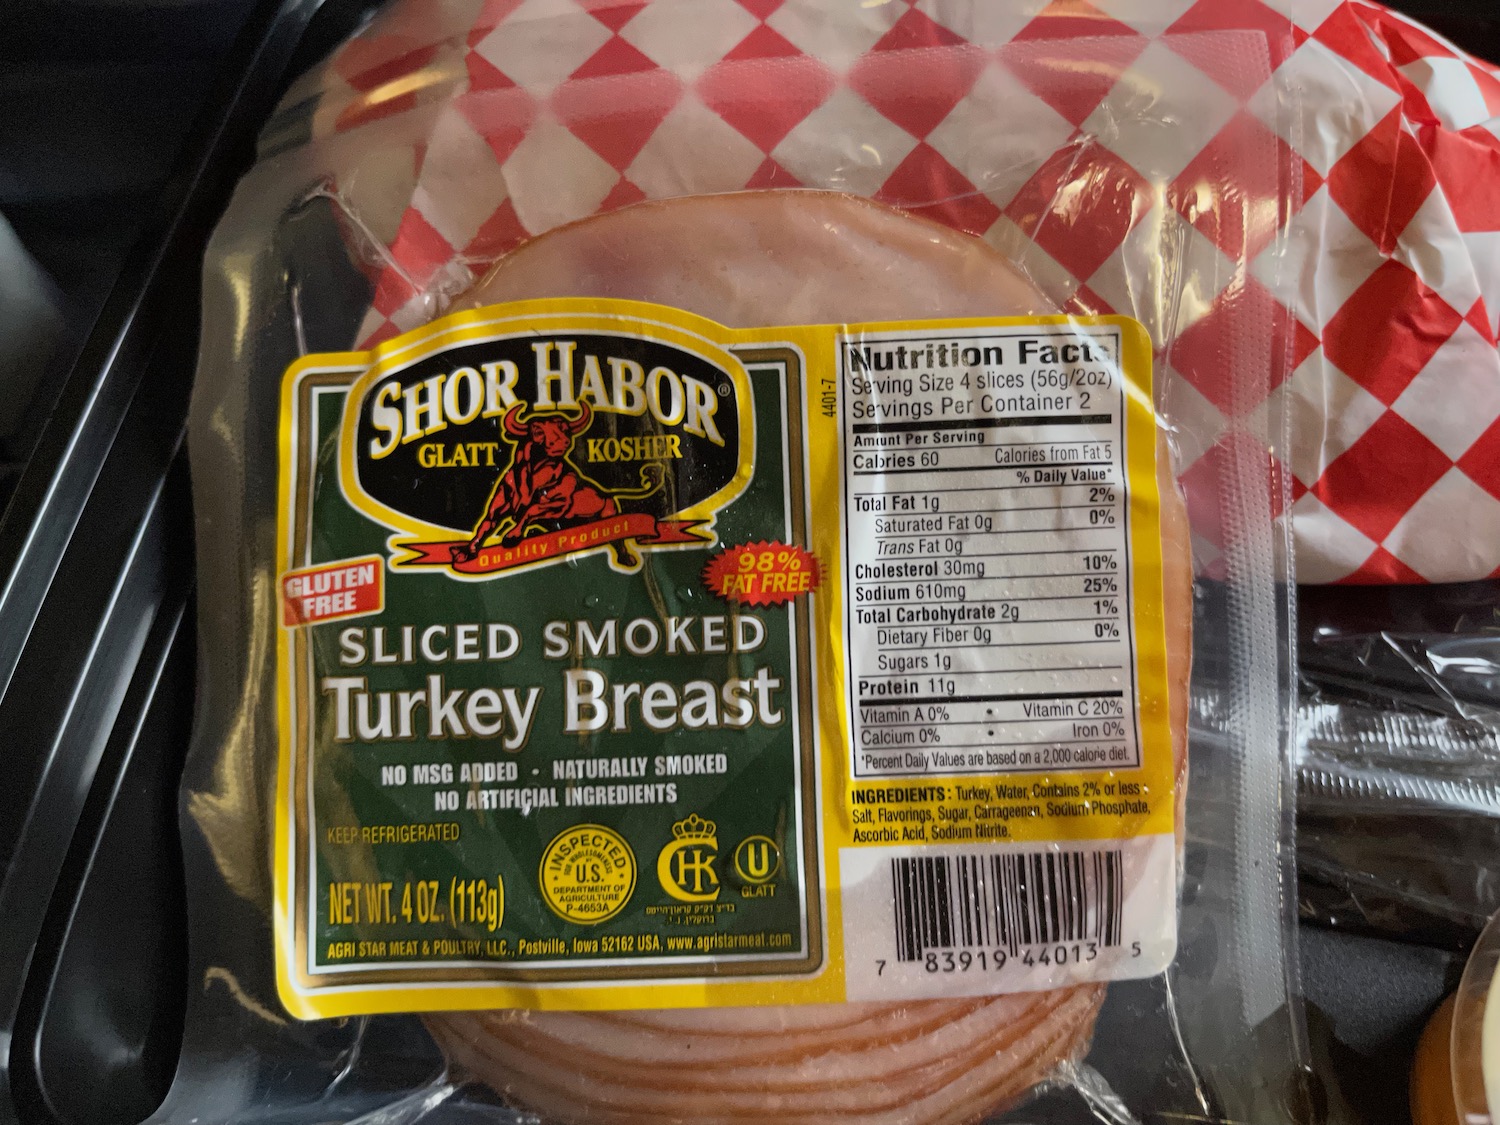 a package of sliced smoked turkey breast